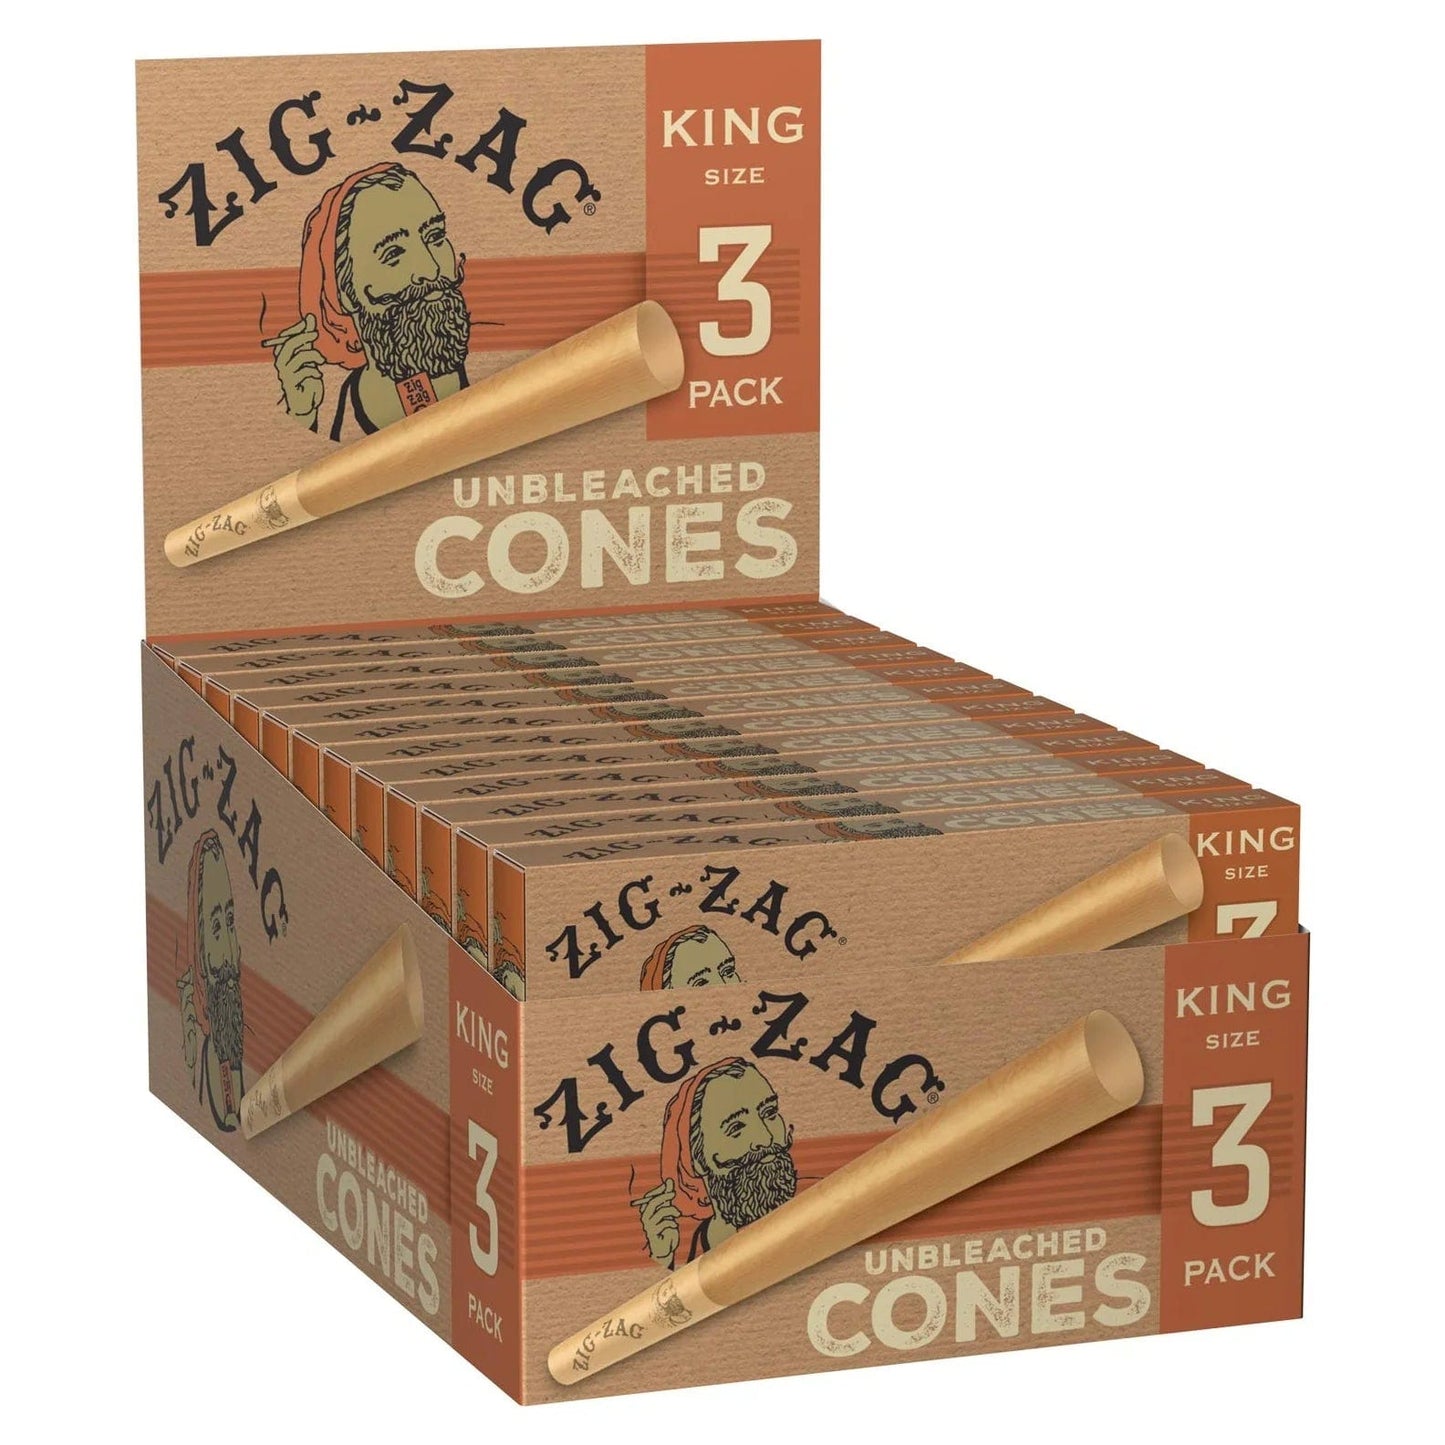 Zig-Zag Papers Zig Zag King Size Pre-Rolled Cones